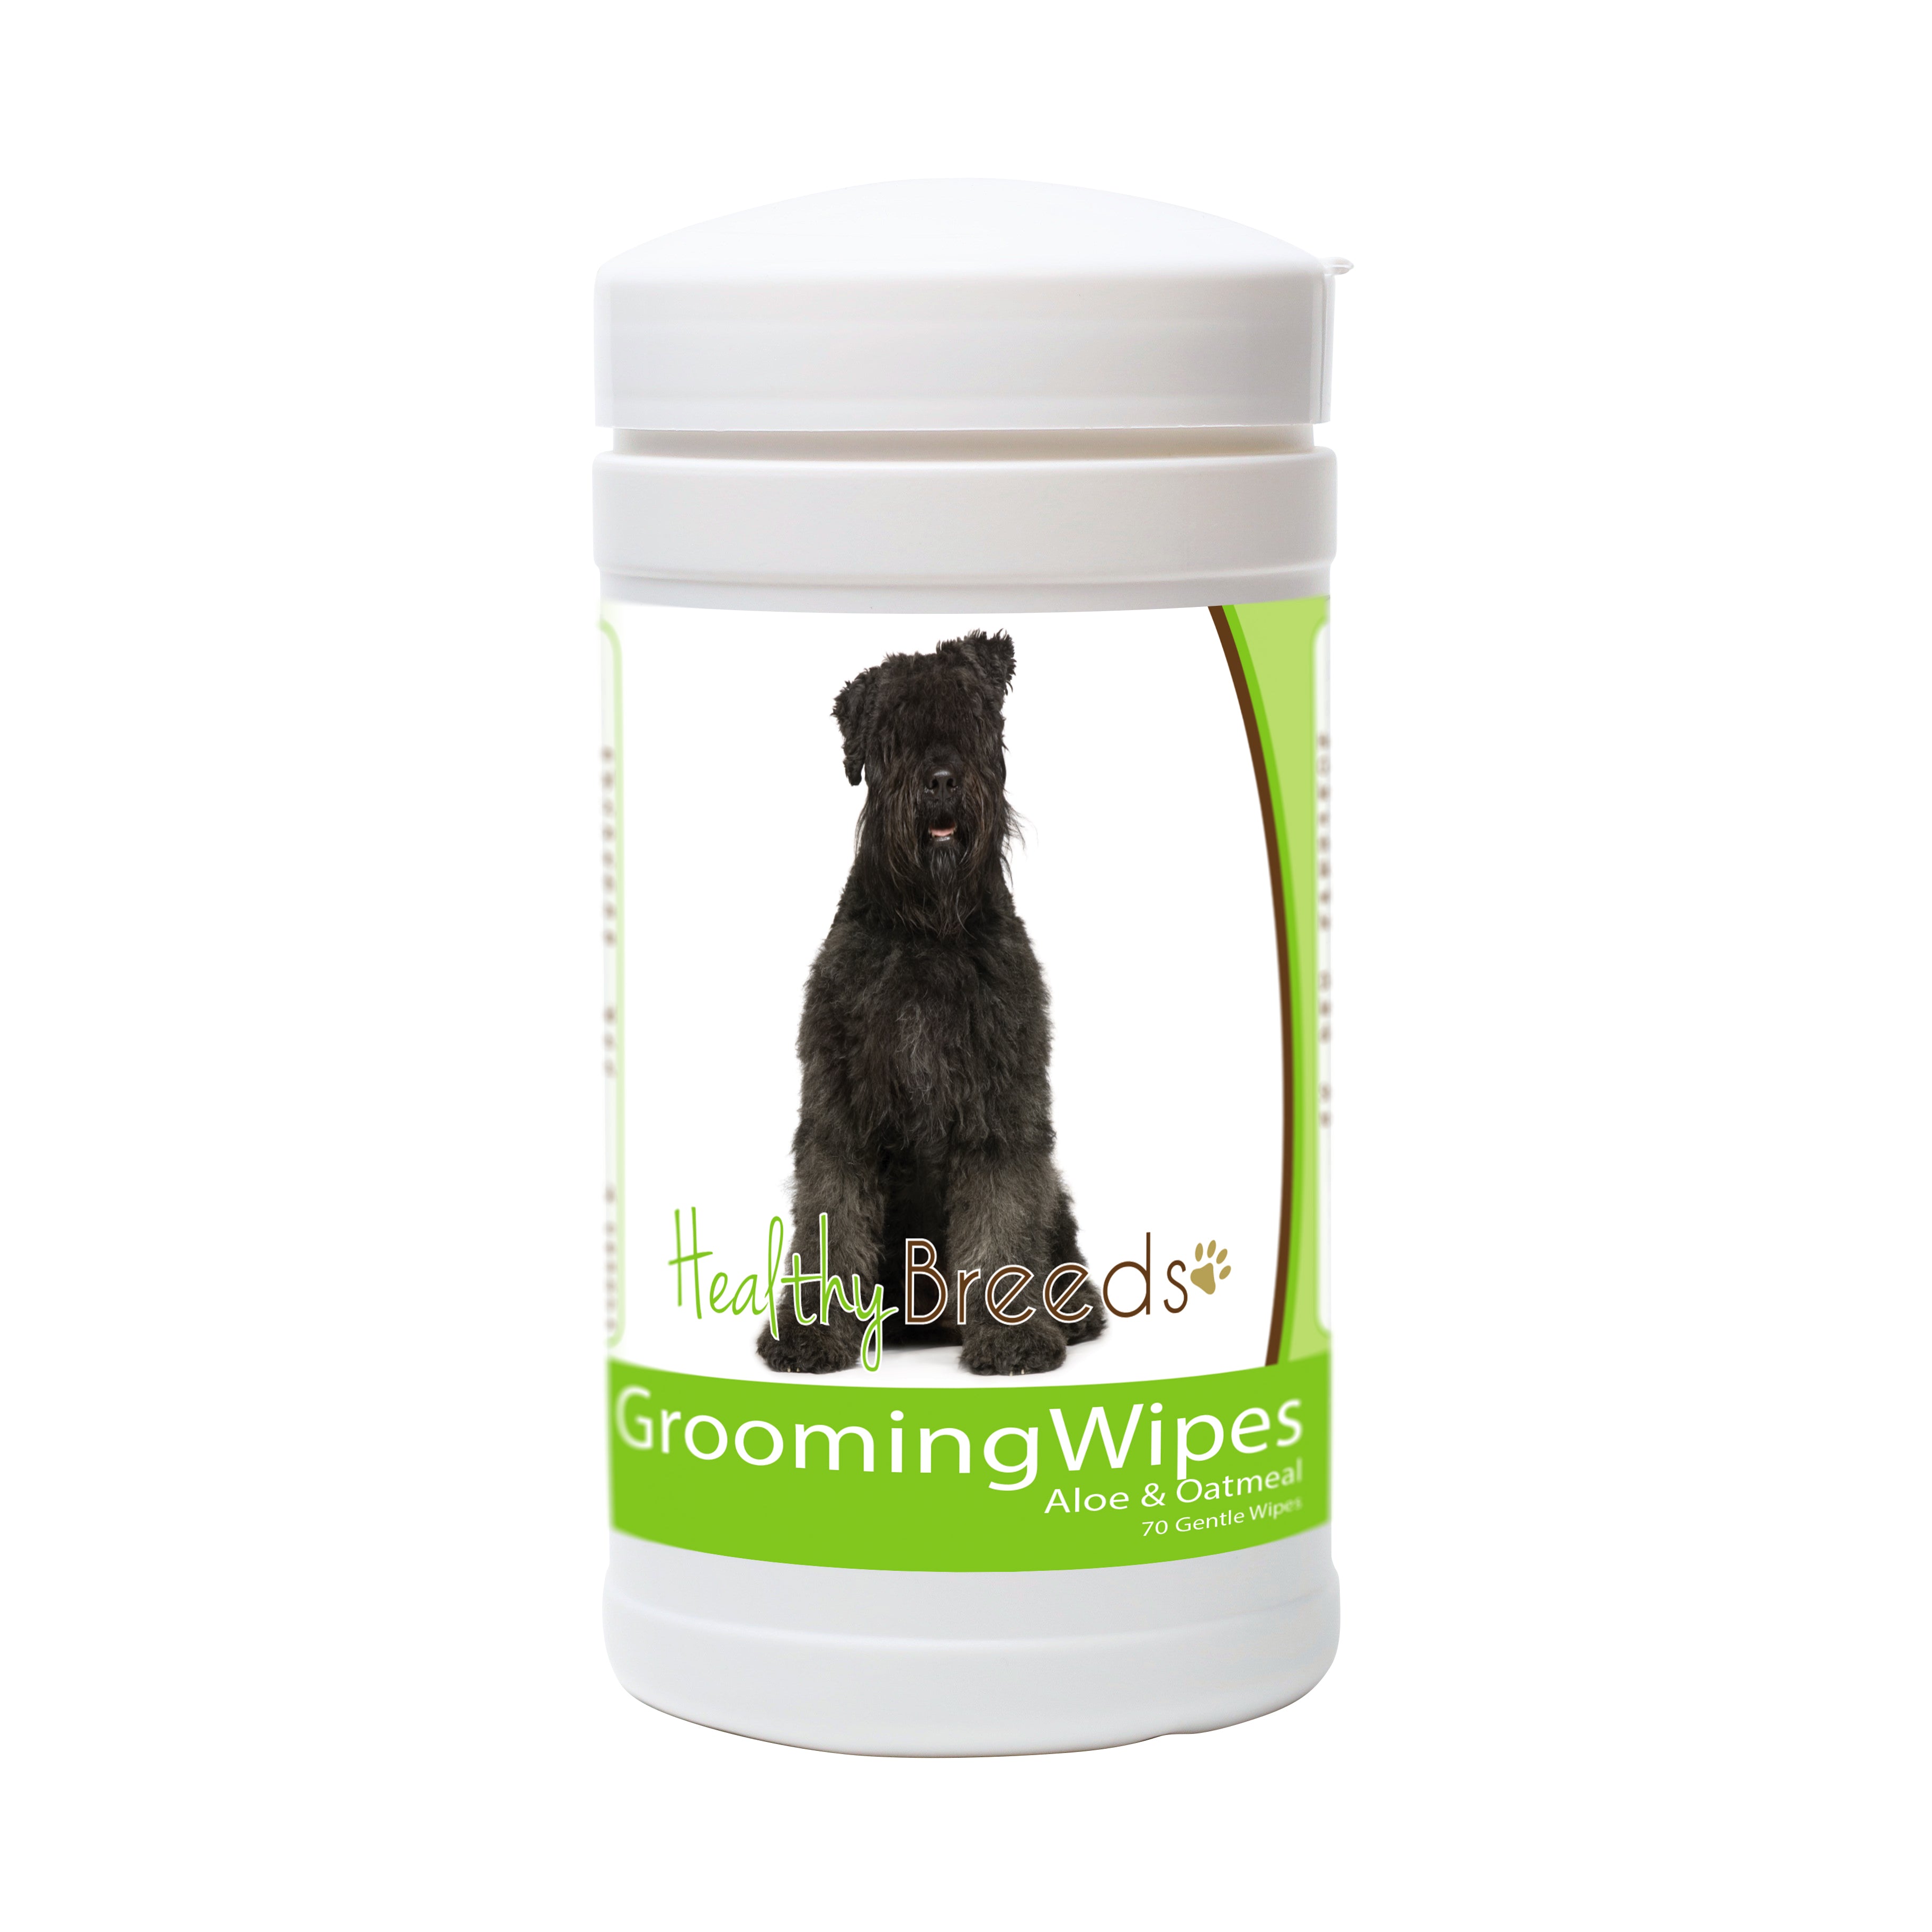 Bouvier des Flandres Grooming Wipes 70 Count